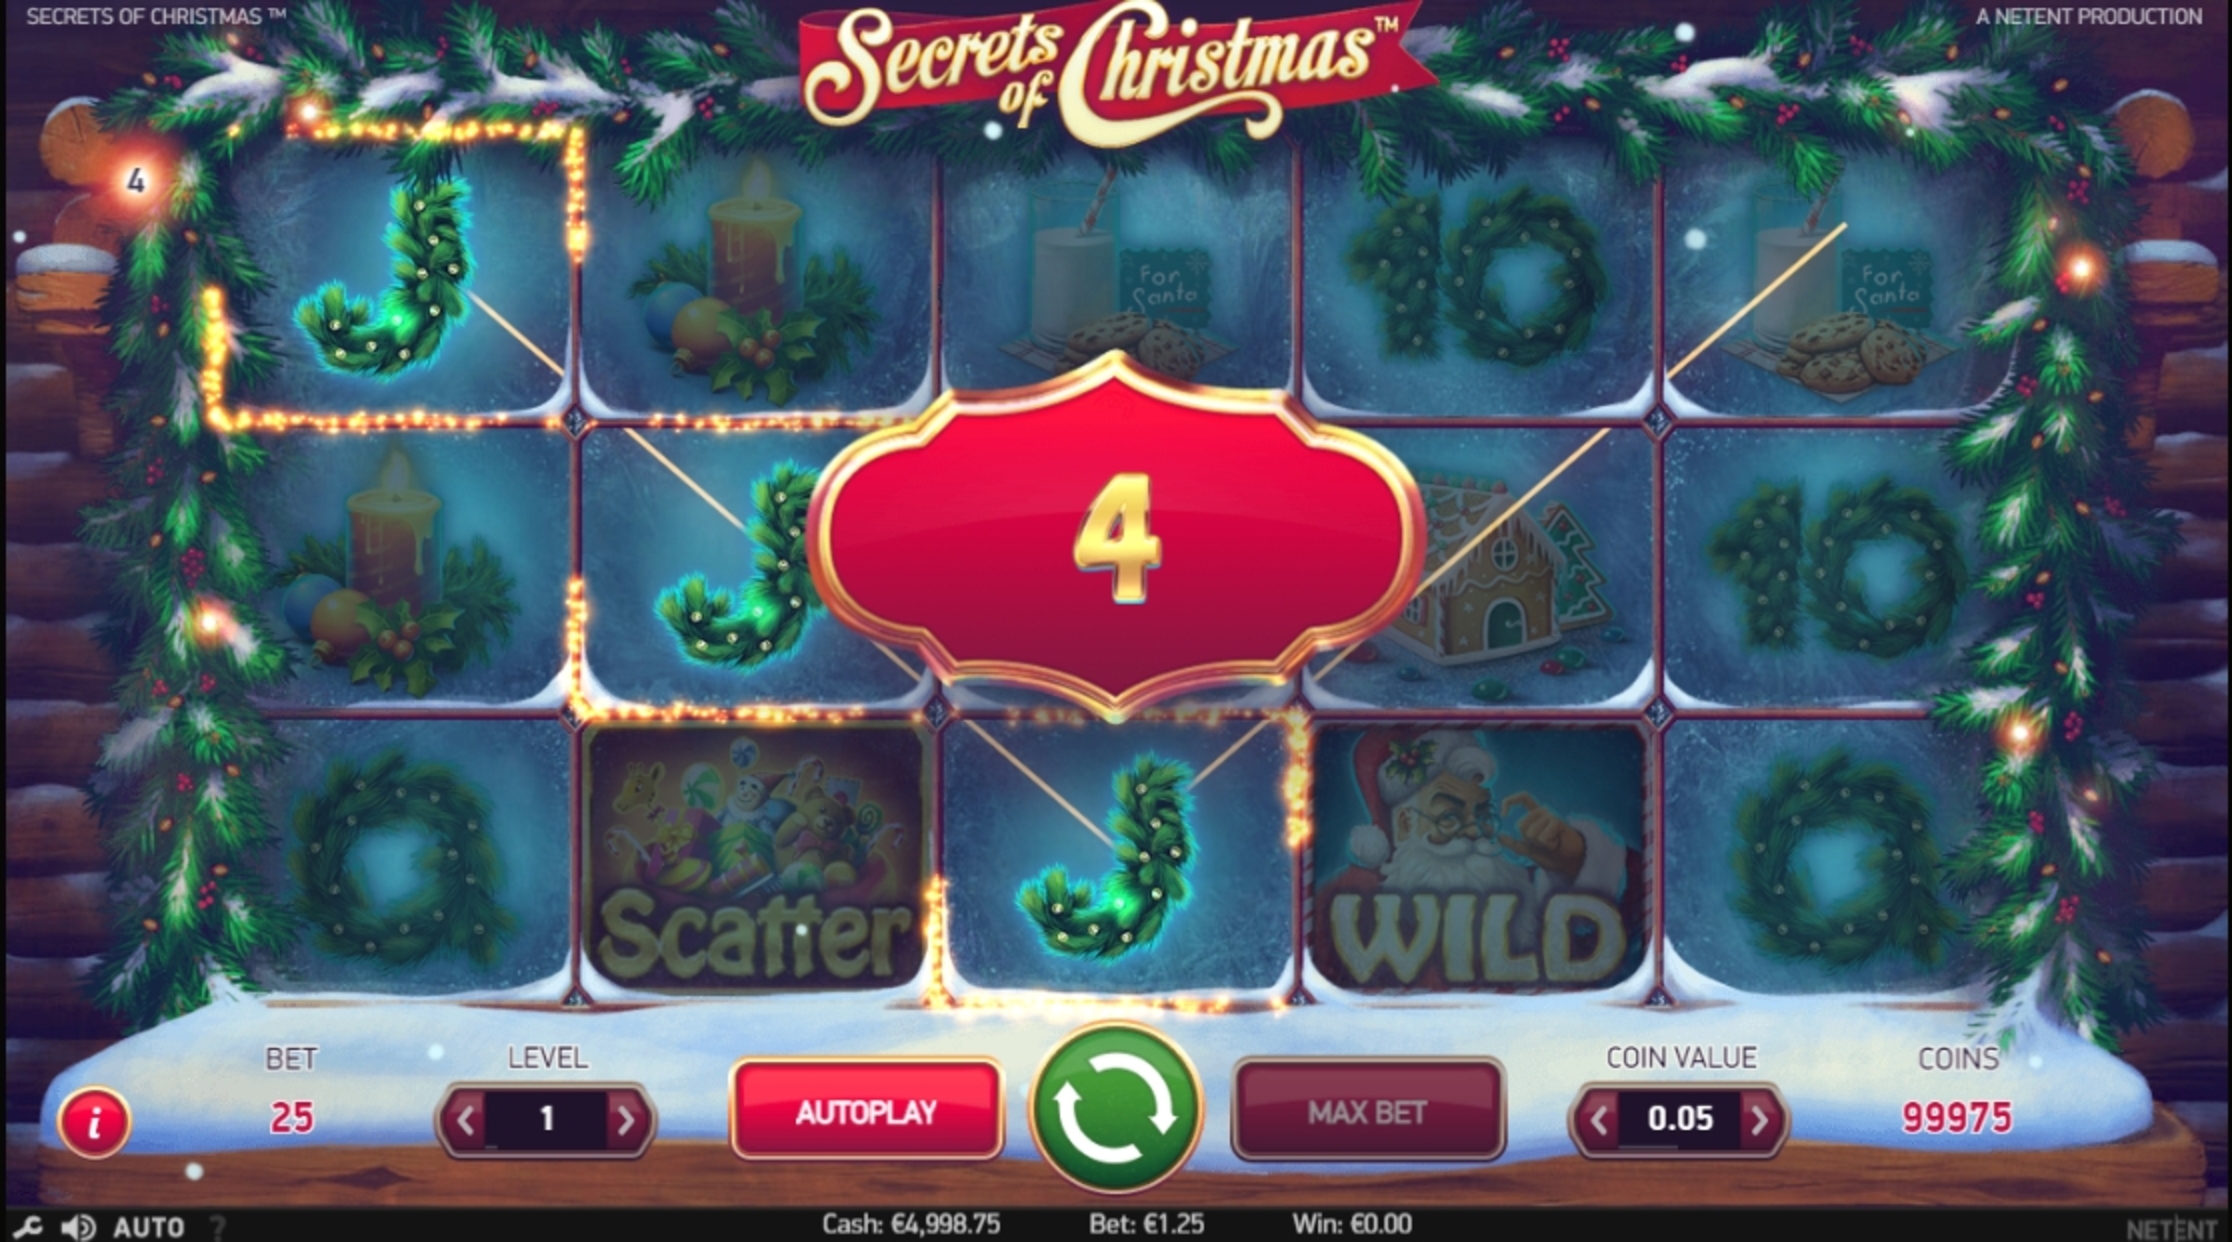 Win Money in Secrets of Christmas Free Slot Game by NetEnt